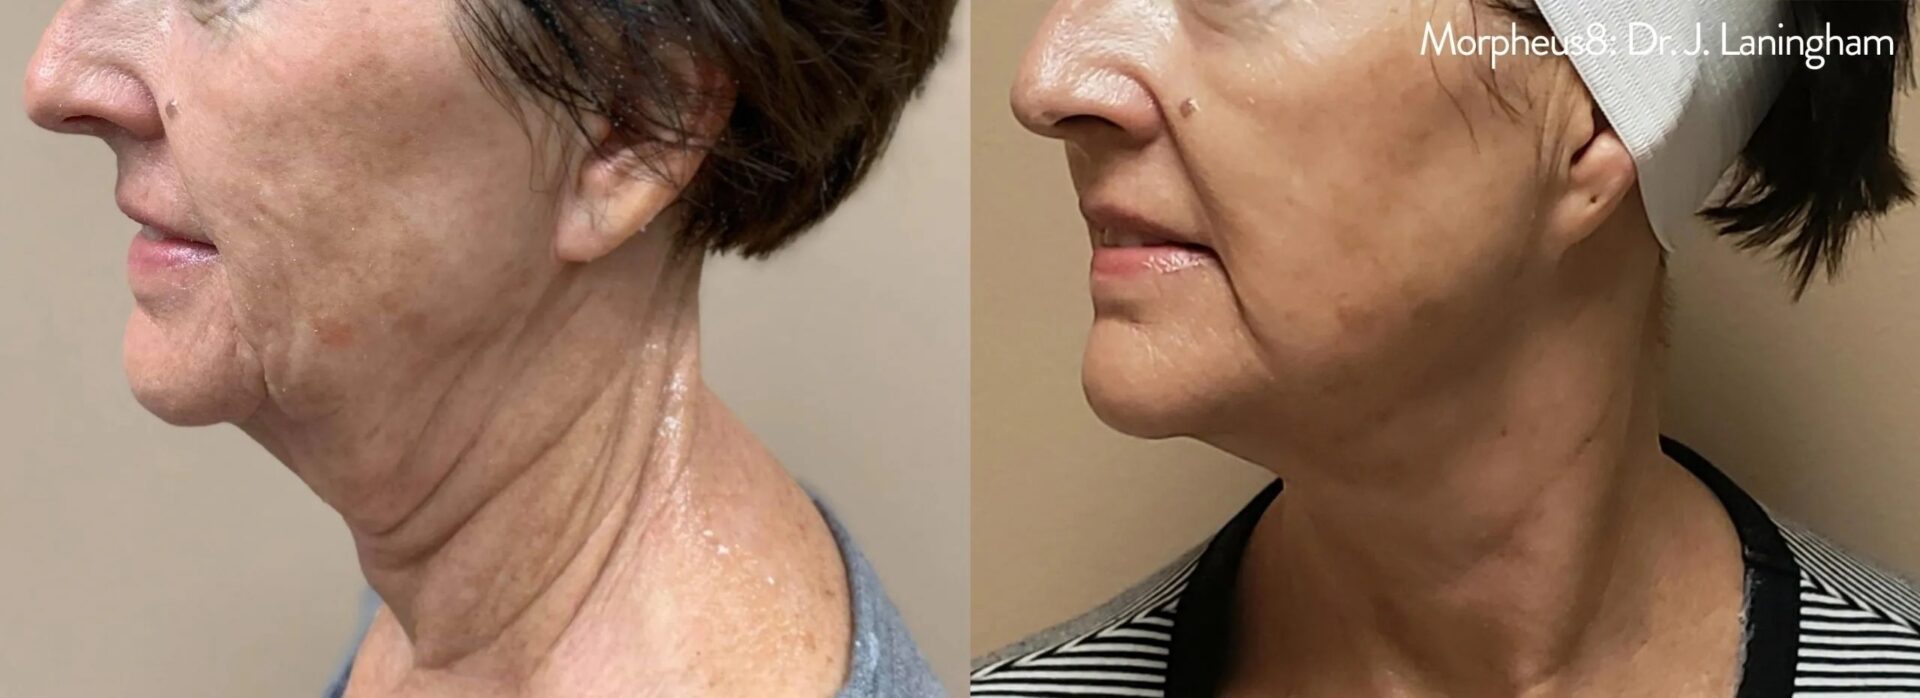 Before and after pictures of a woman who has tighter skin around her face and neck